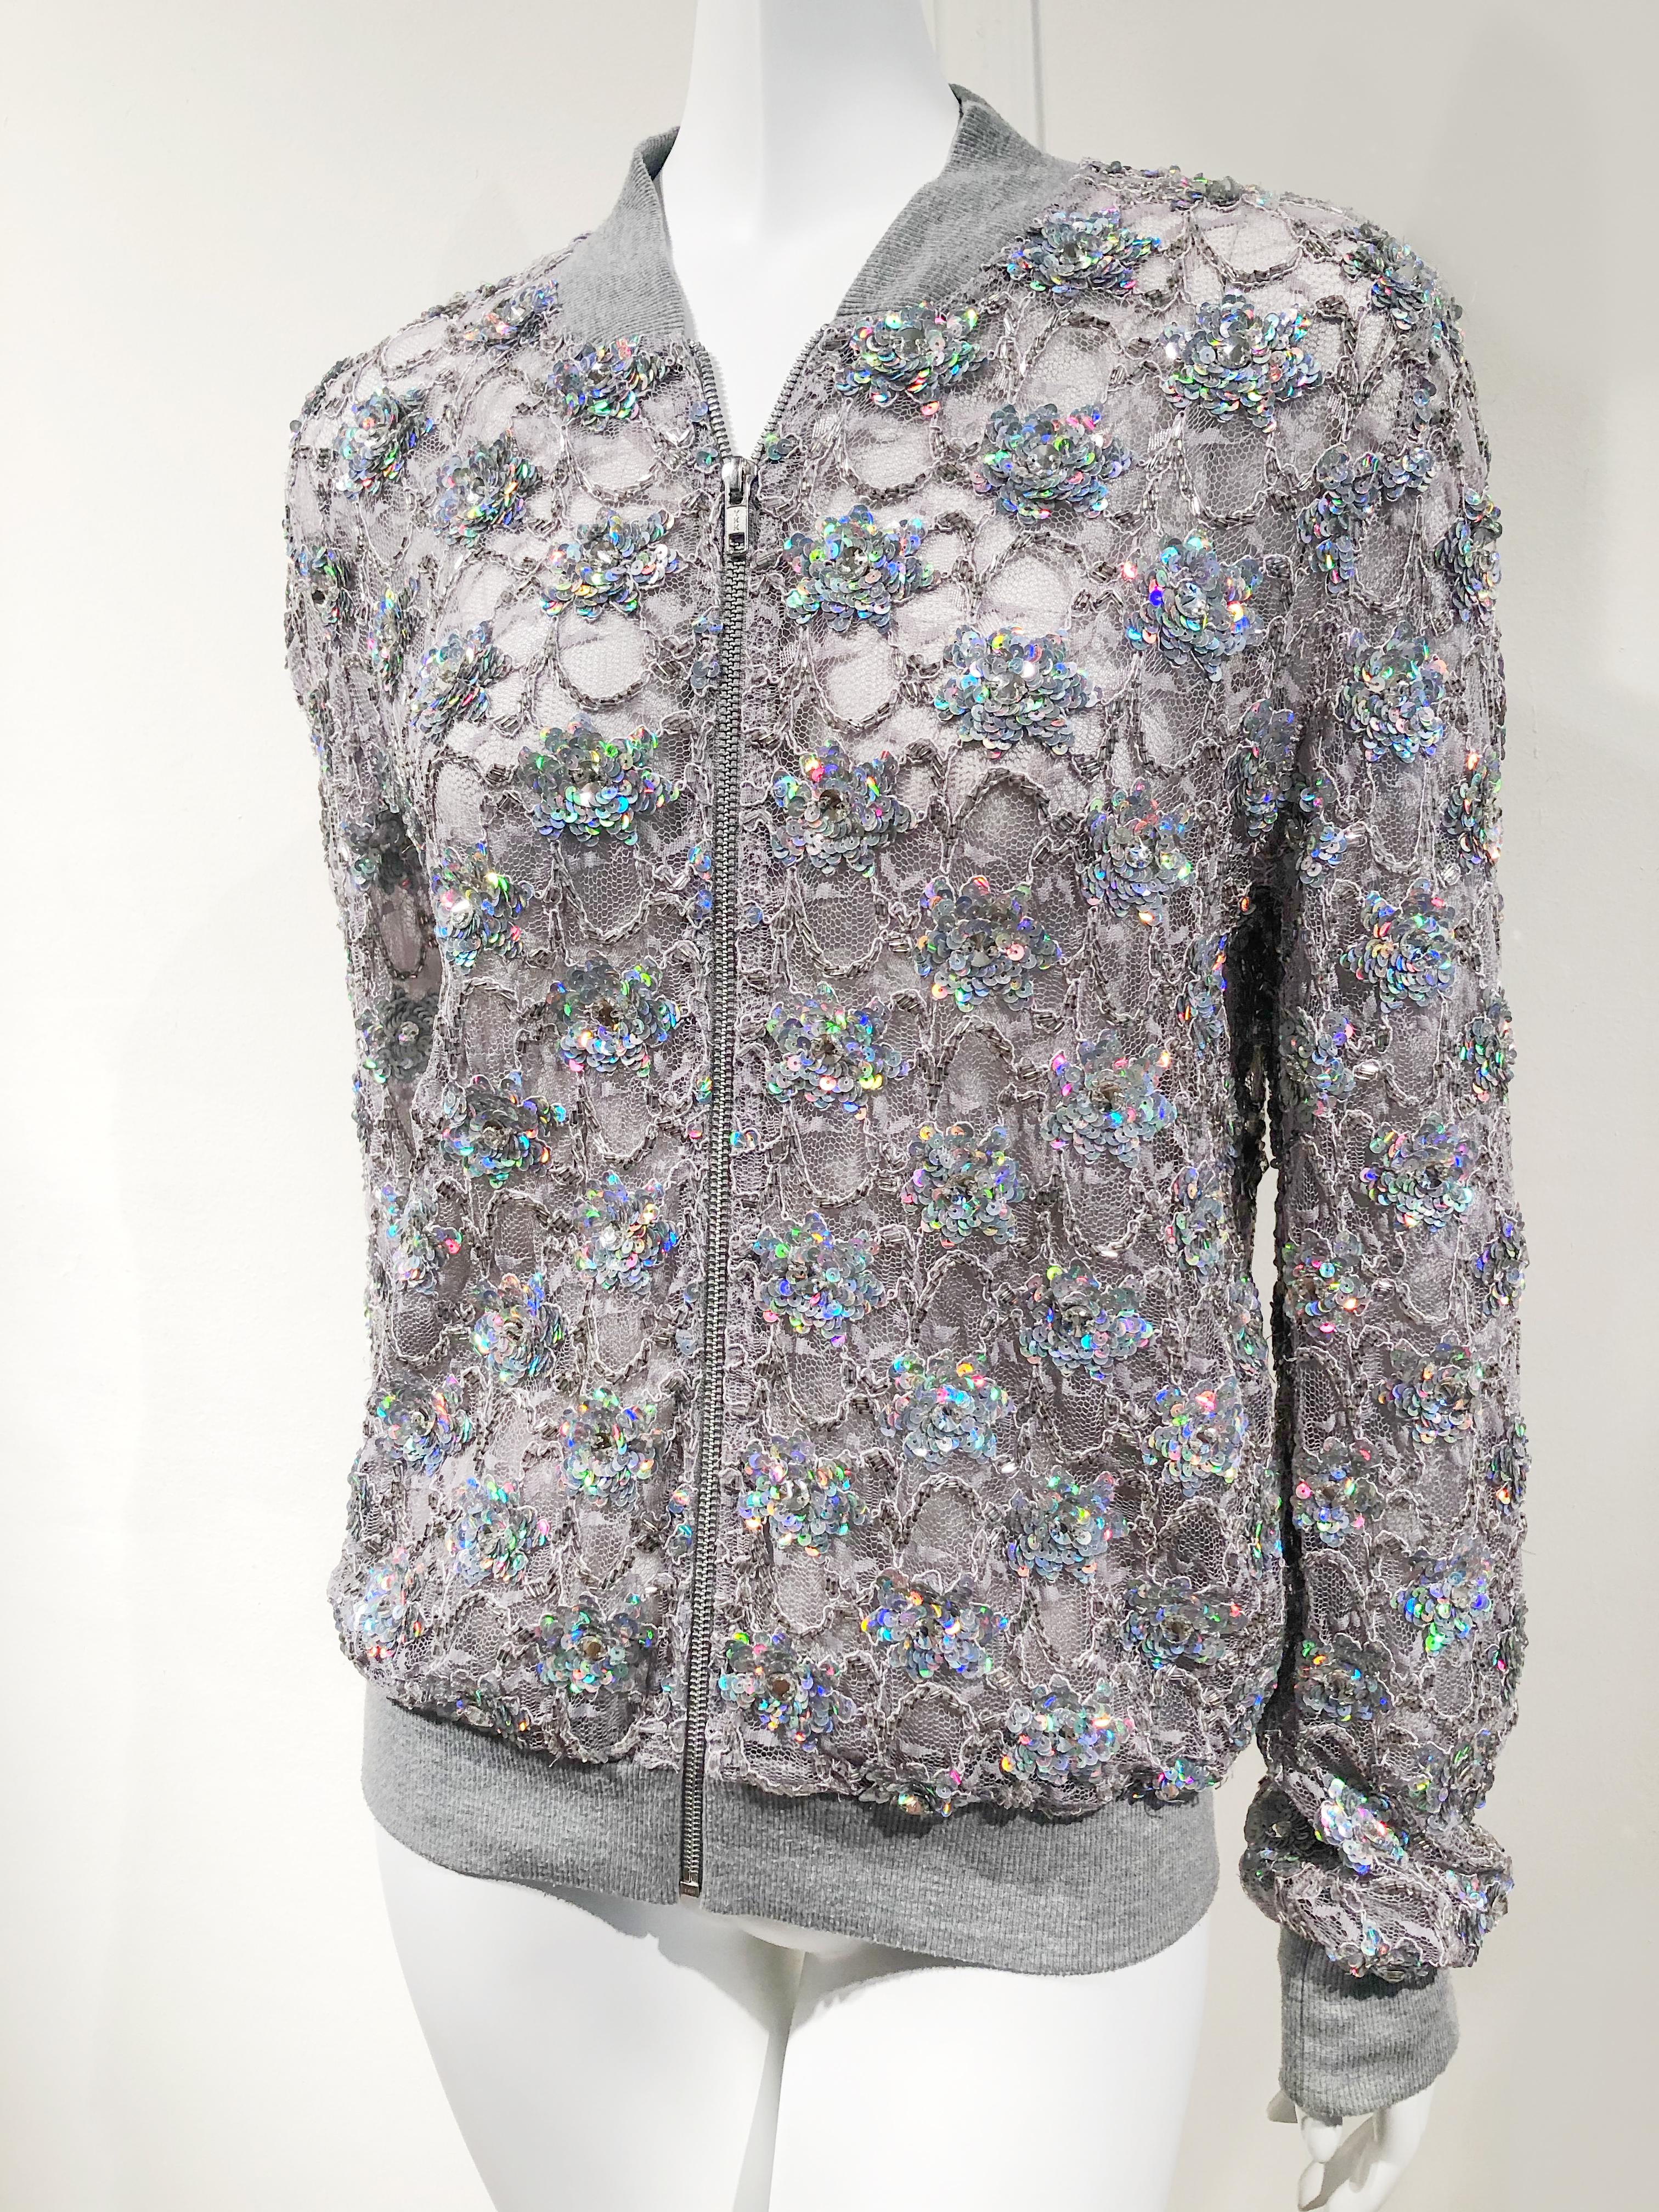 Sporty gray lace zippered bomber jacket with iridescent sequin hand embellishments by Ashish. Knit cuffs, collar and hem. Size Medium.
Condition
New without tags. Excellent condition.